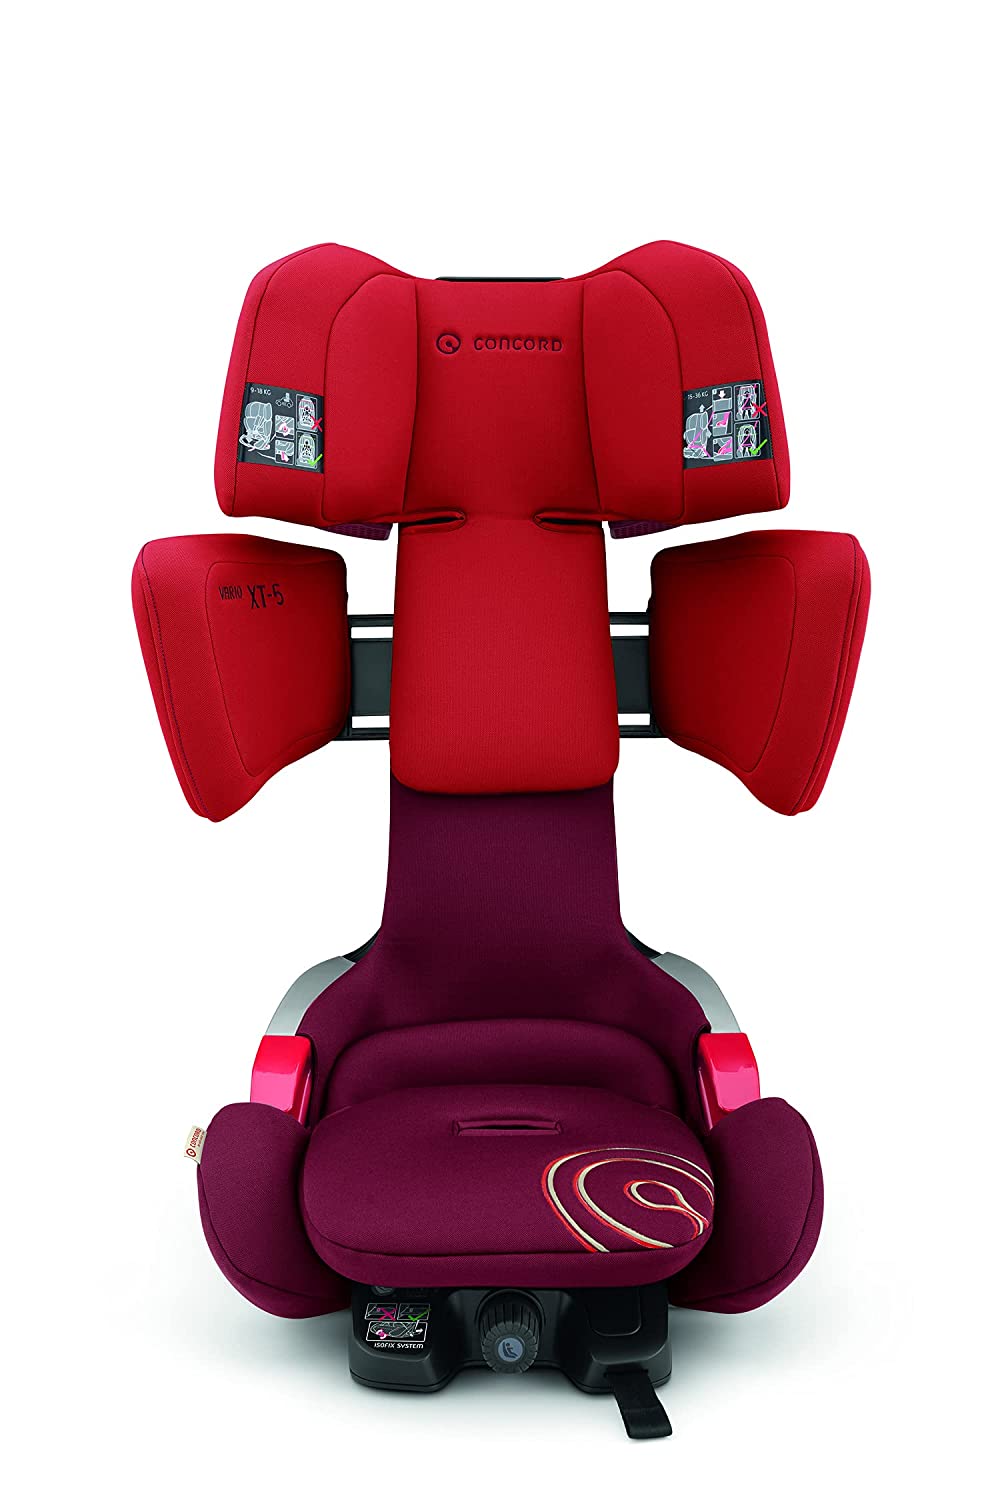 Concord VARI0988 Vario XT-5 Child Seat Group 1 2 3, from 9 to 36 kg, Isofix and Top Tether, Red